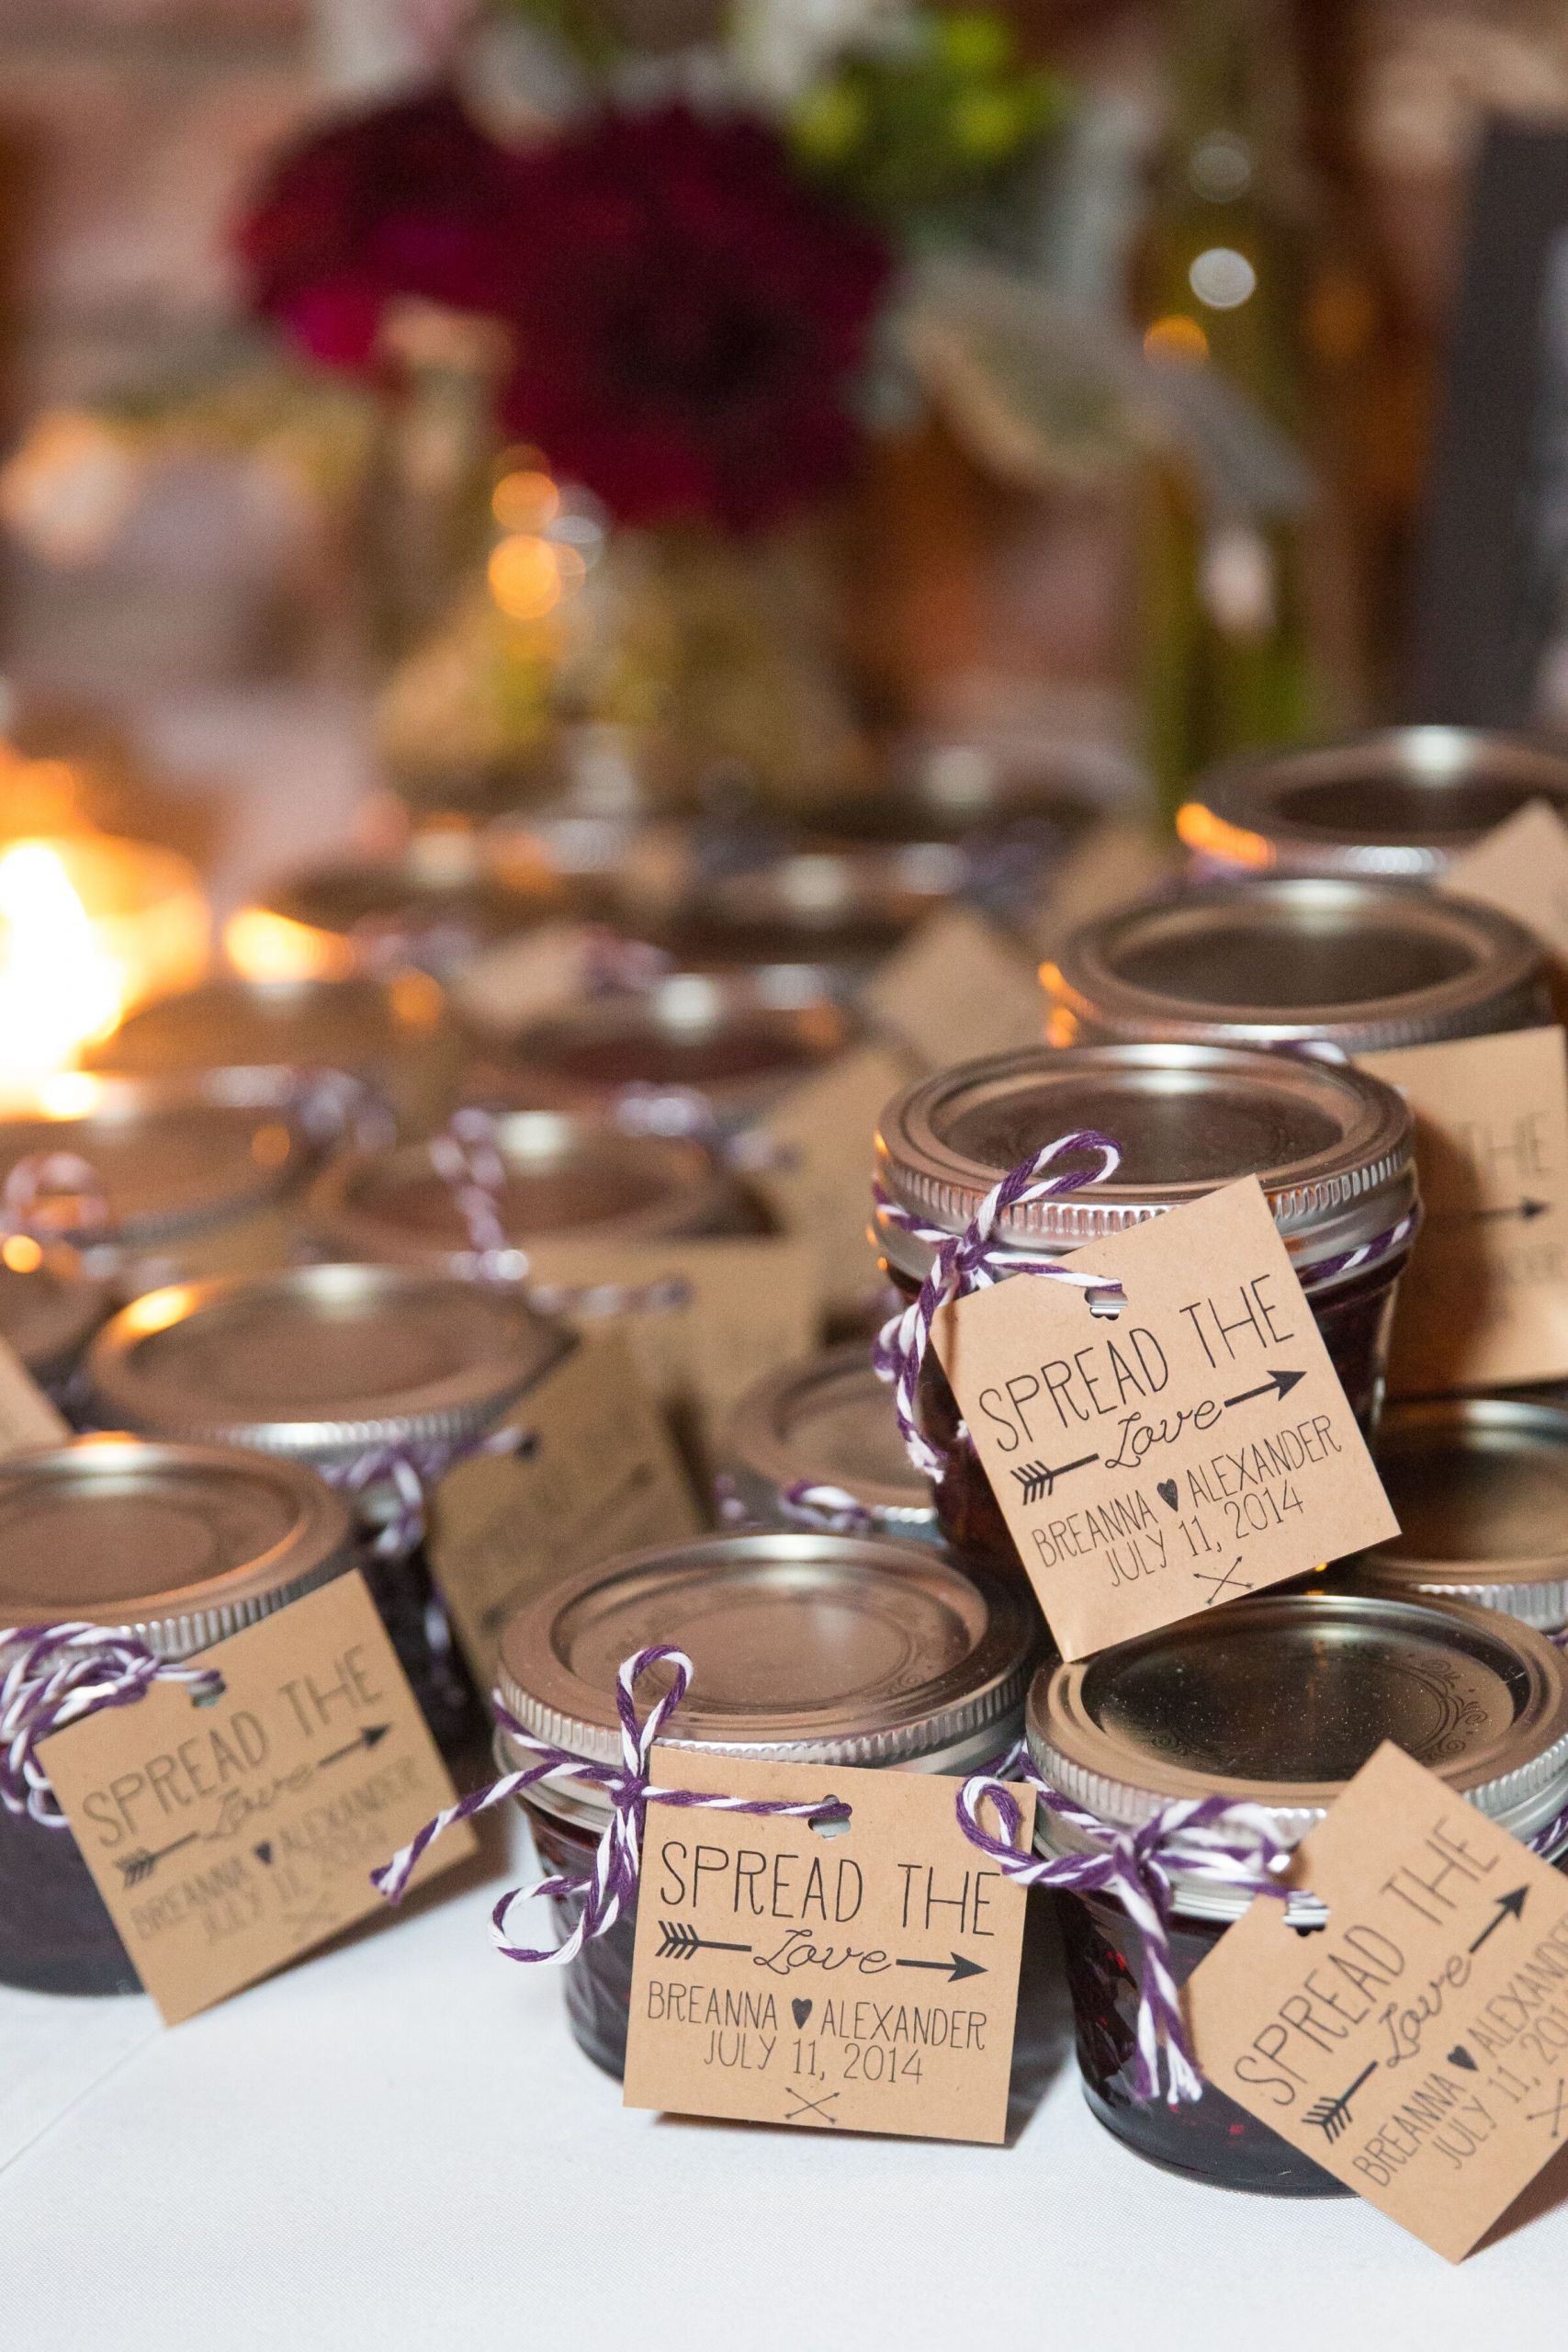 Wedding Gifts For Bridal Party
 Spread the Love Jam Wedding Favors